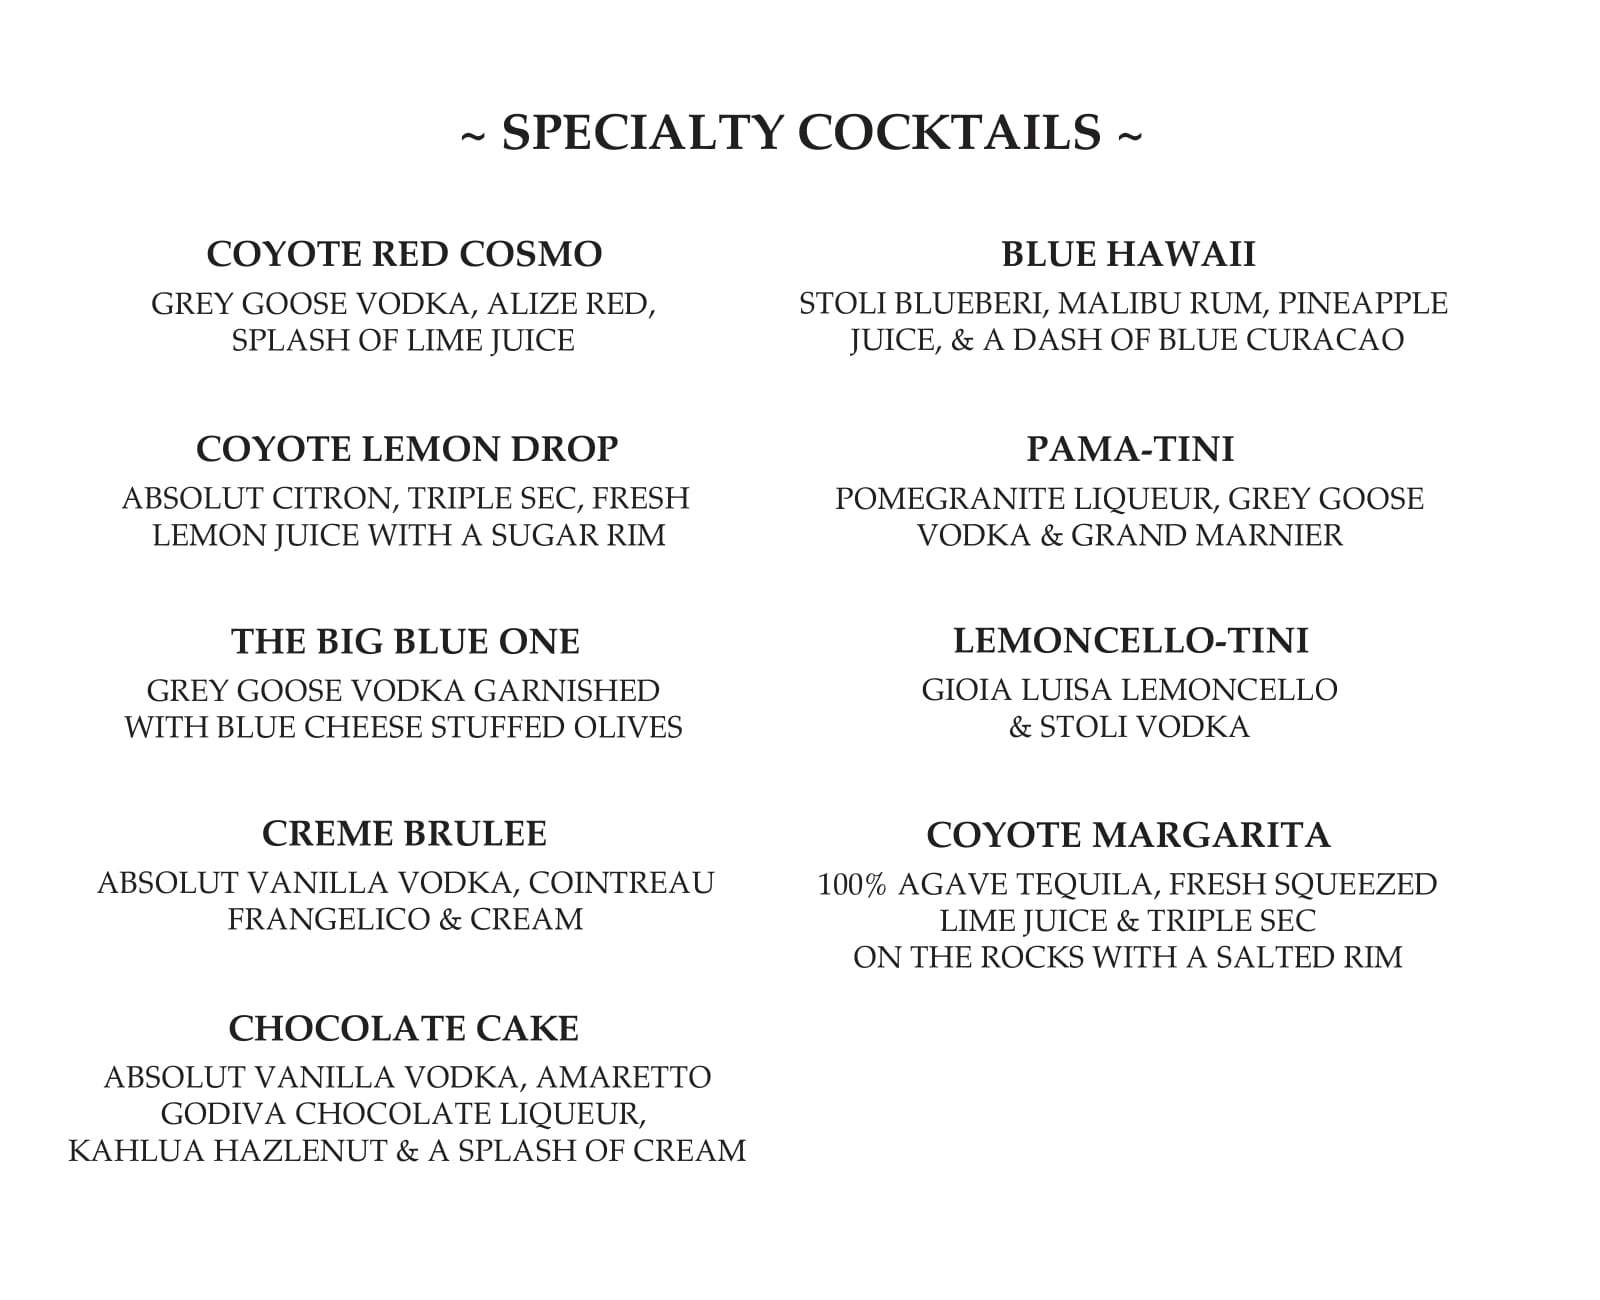 Speciality Cocktails